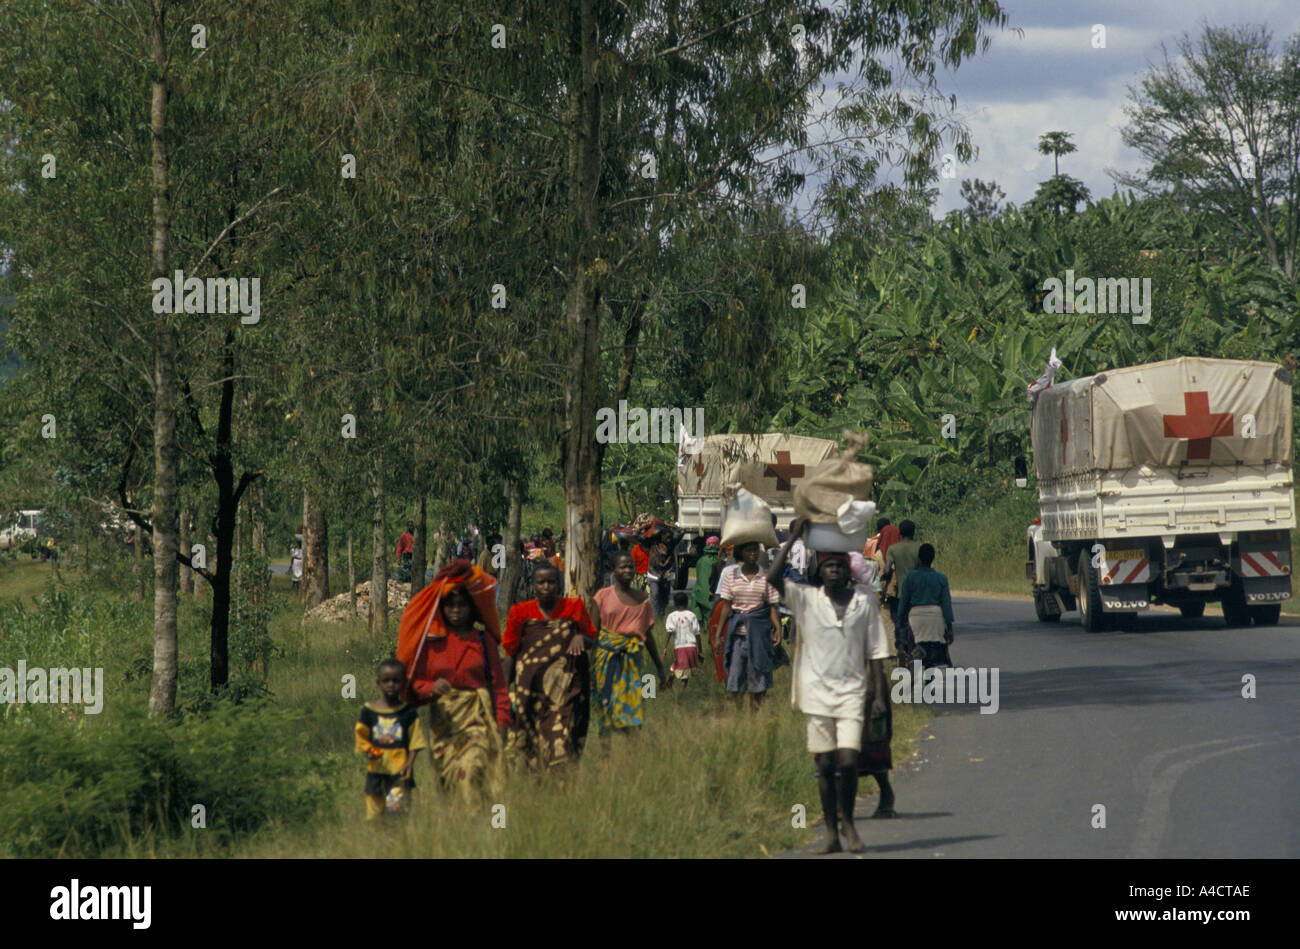 'RWANDAN CIVIL WAR', INTERNATIONAL RED CROSS CONVOY BRINGING IN MEDICAL SUPPLIES TO KIGALI NEARS THE TOWN AND REFUGEES FLEE IN THE OPPOSITE DIRECTION. april 1994 Stock Photo